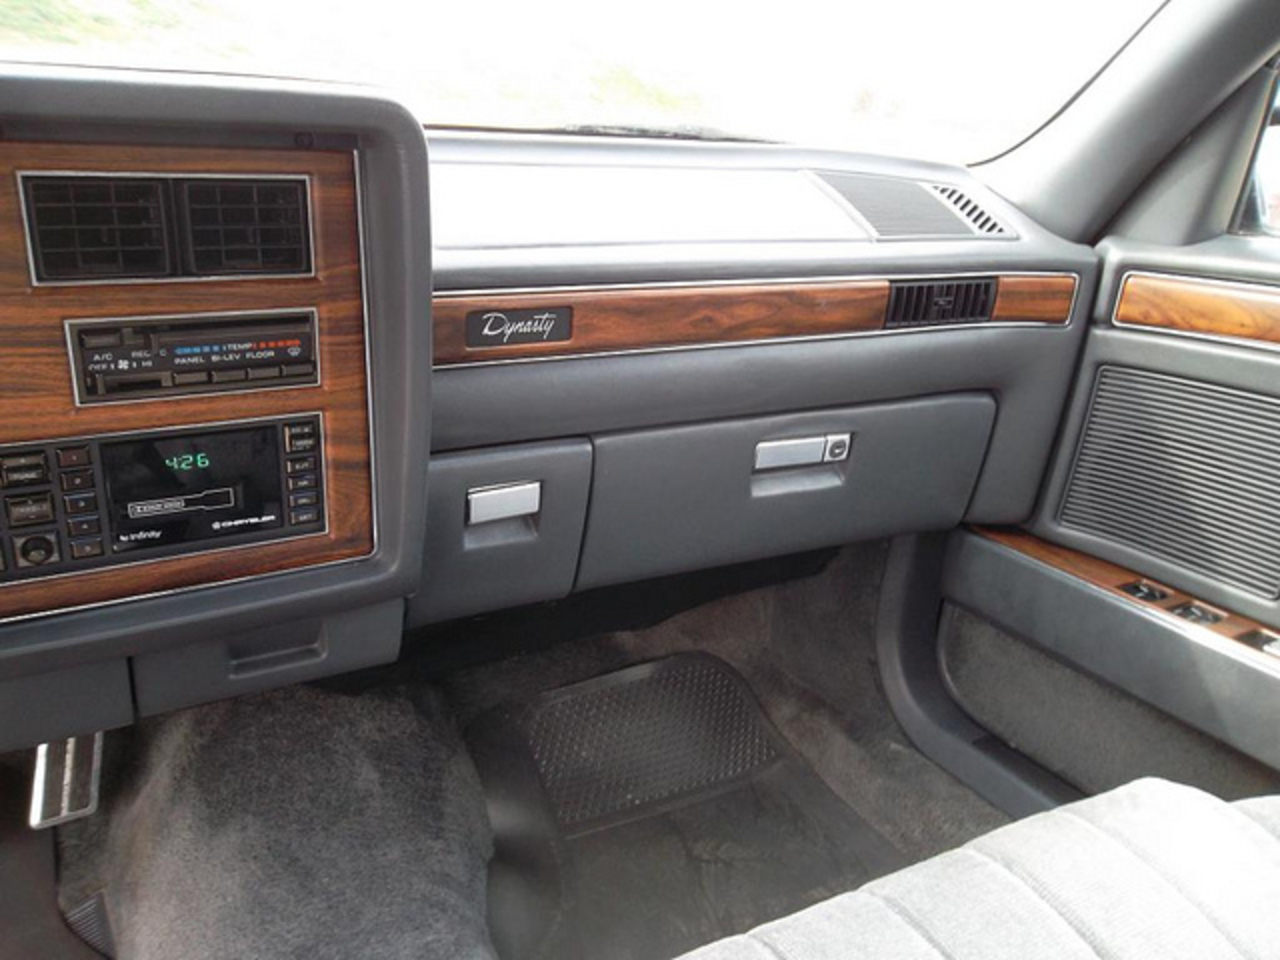 1989 Dodge Dynasty LE Many options and no rust Original nice old ...